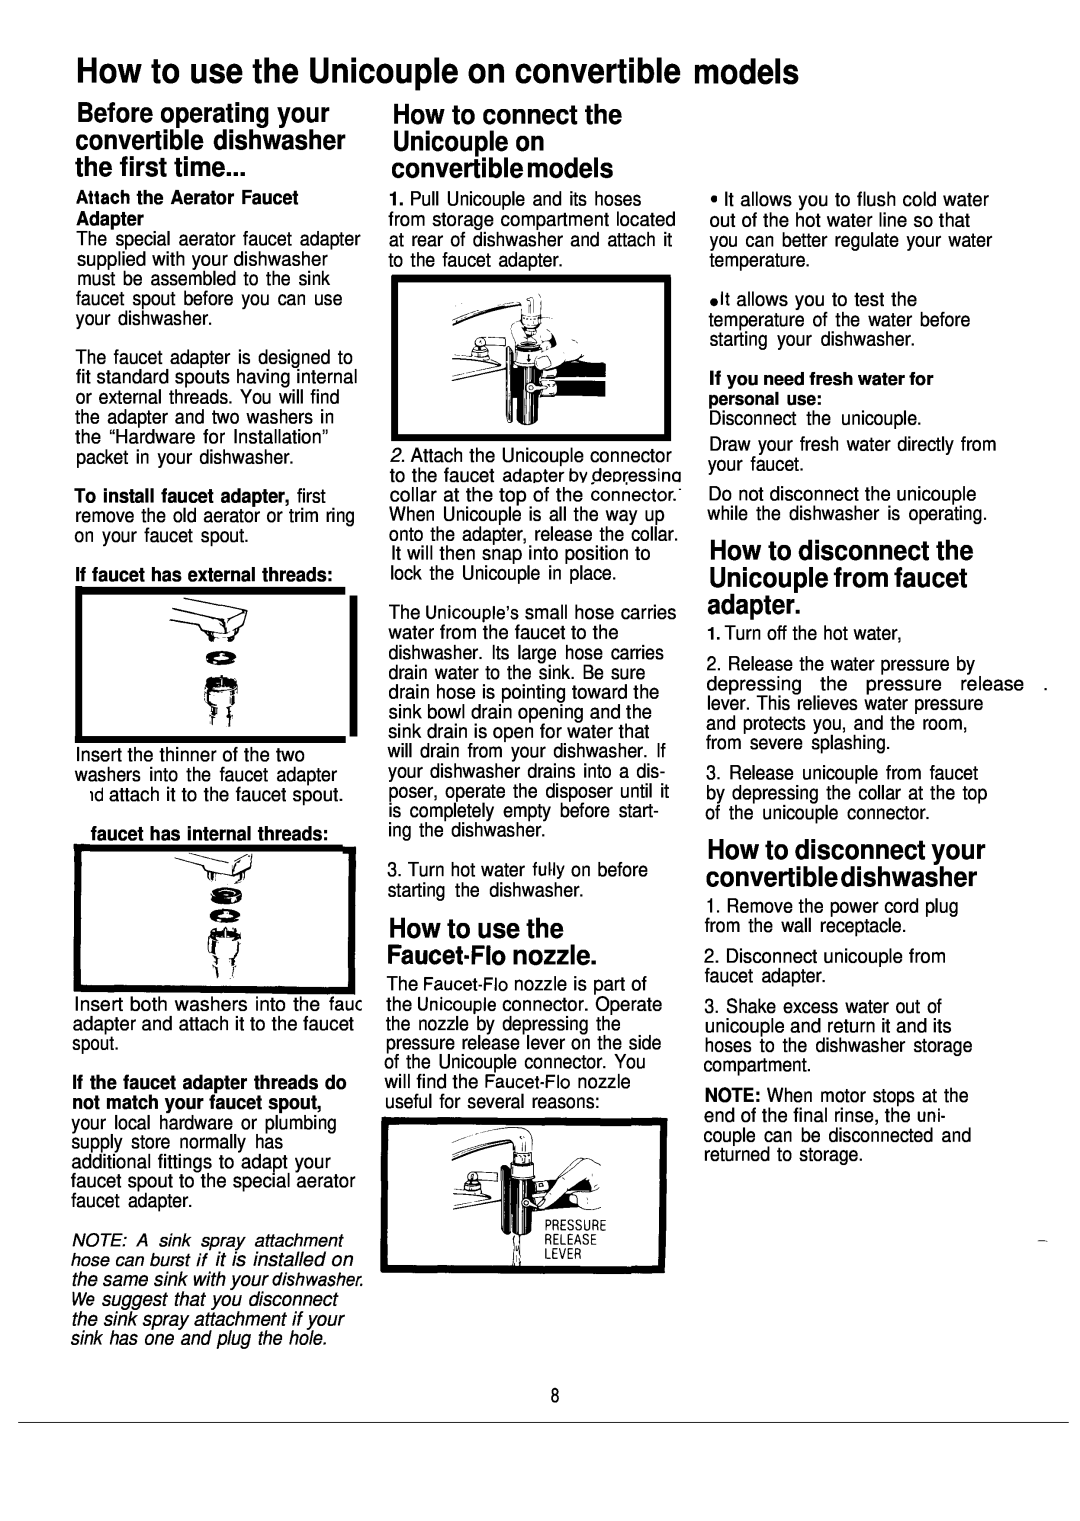 Hotpoint Dishwasher manual How to use the Unicouple on convertible models, How to use the Faucet=Flo nozzle 